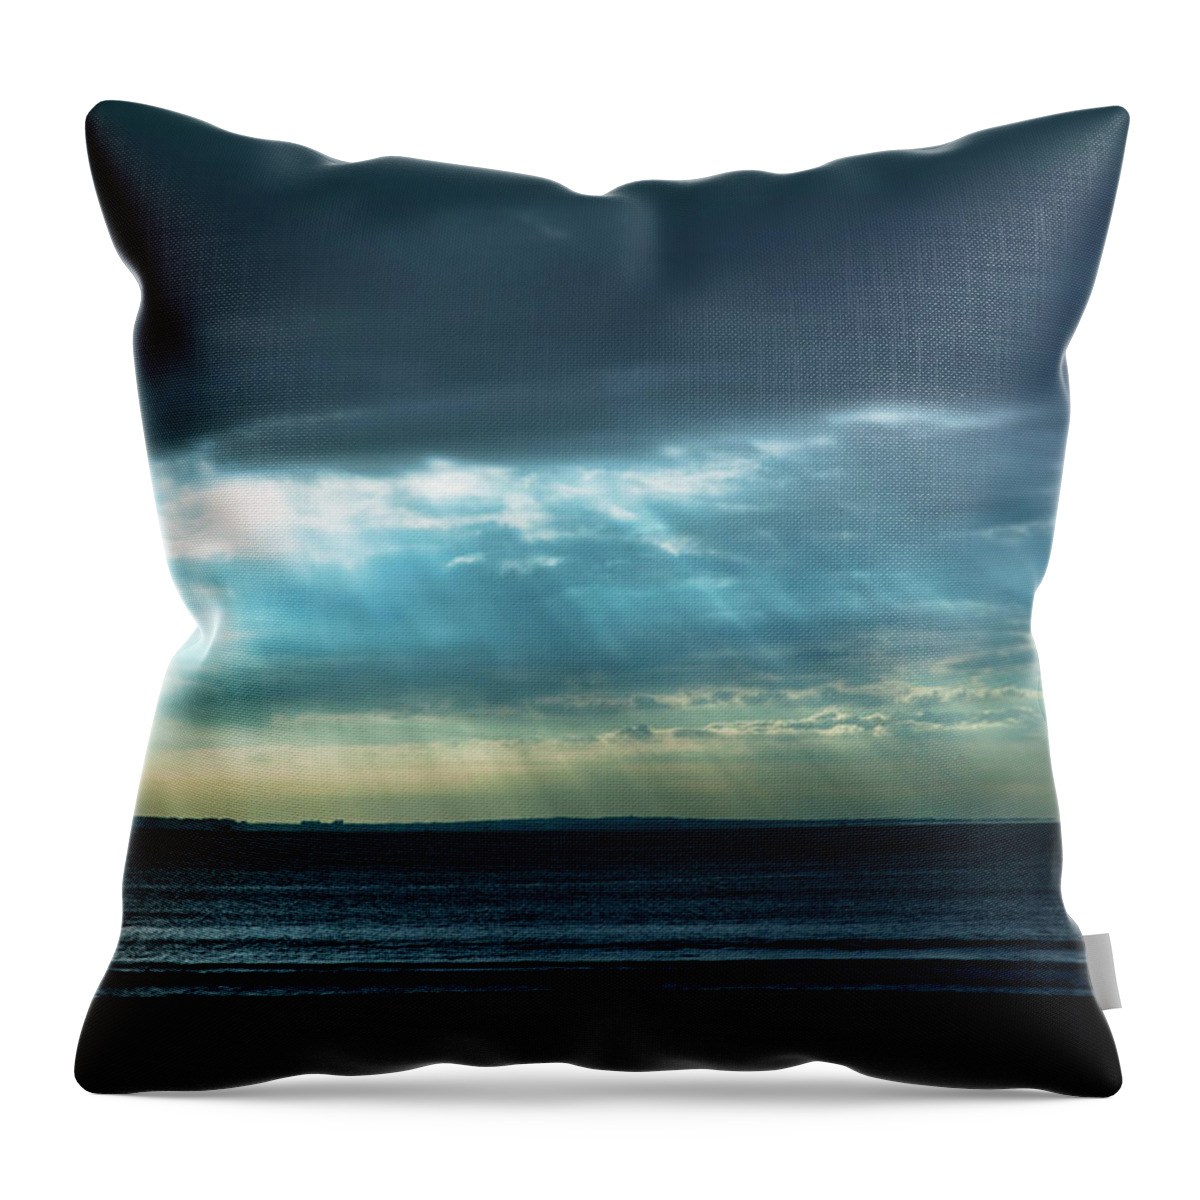 Scenics Throw Pillow featuring the photograph The Beach In The Morning by Hiroshi Watanabe